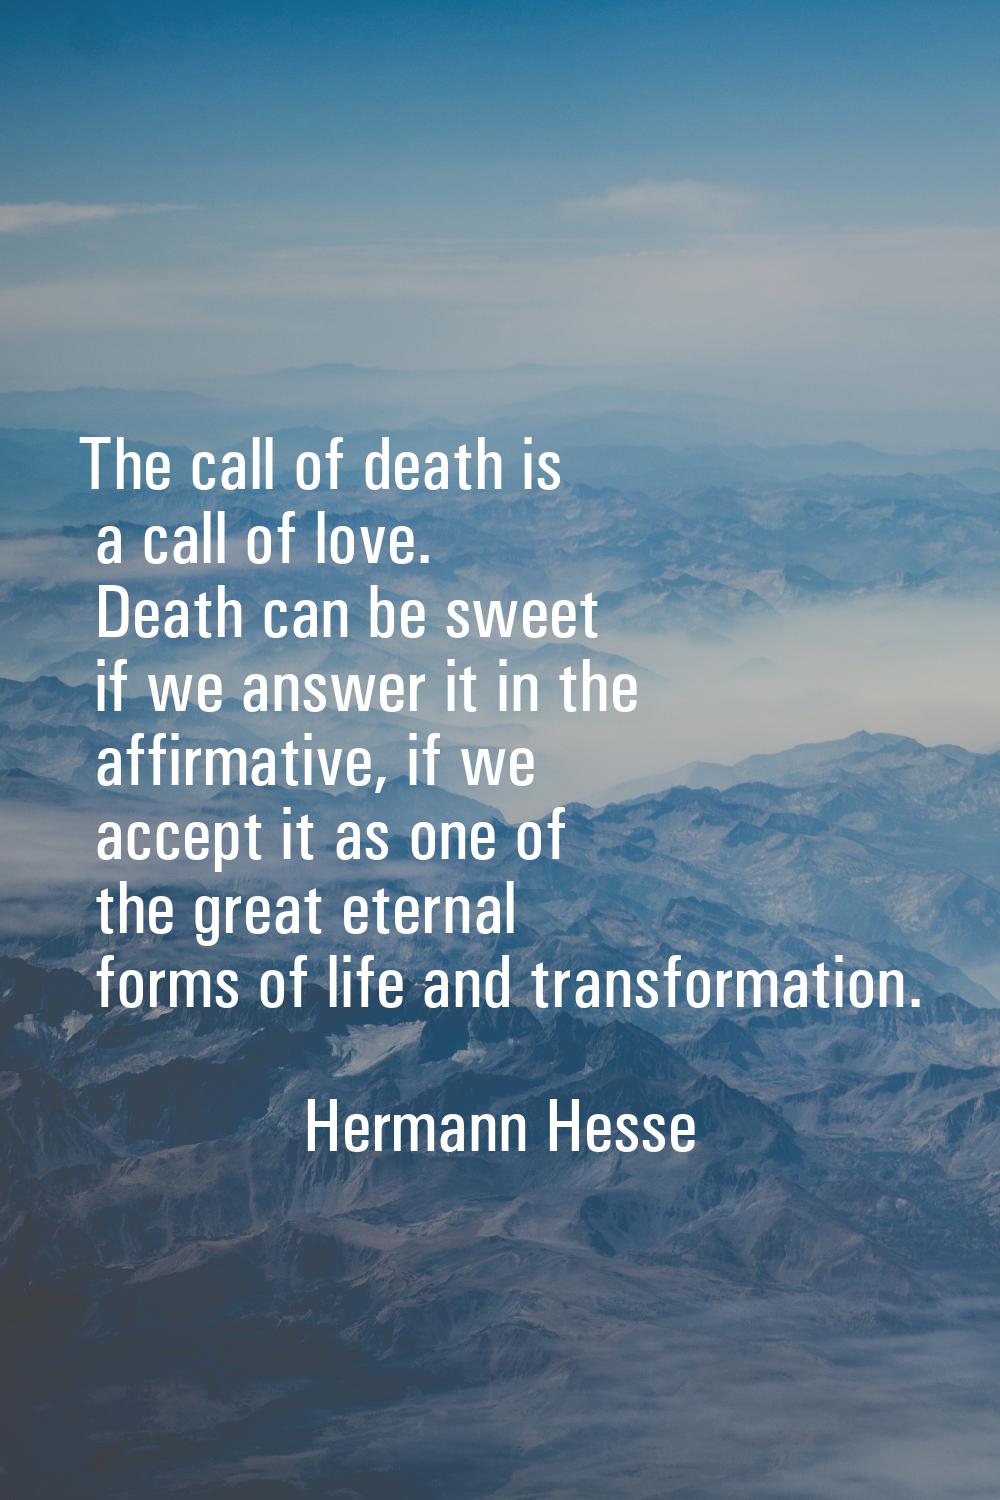 The call of death is a call of love. Death can be sweet if we answer it in the affirmative, if we a